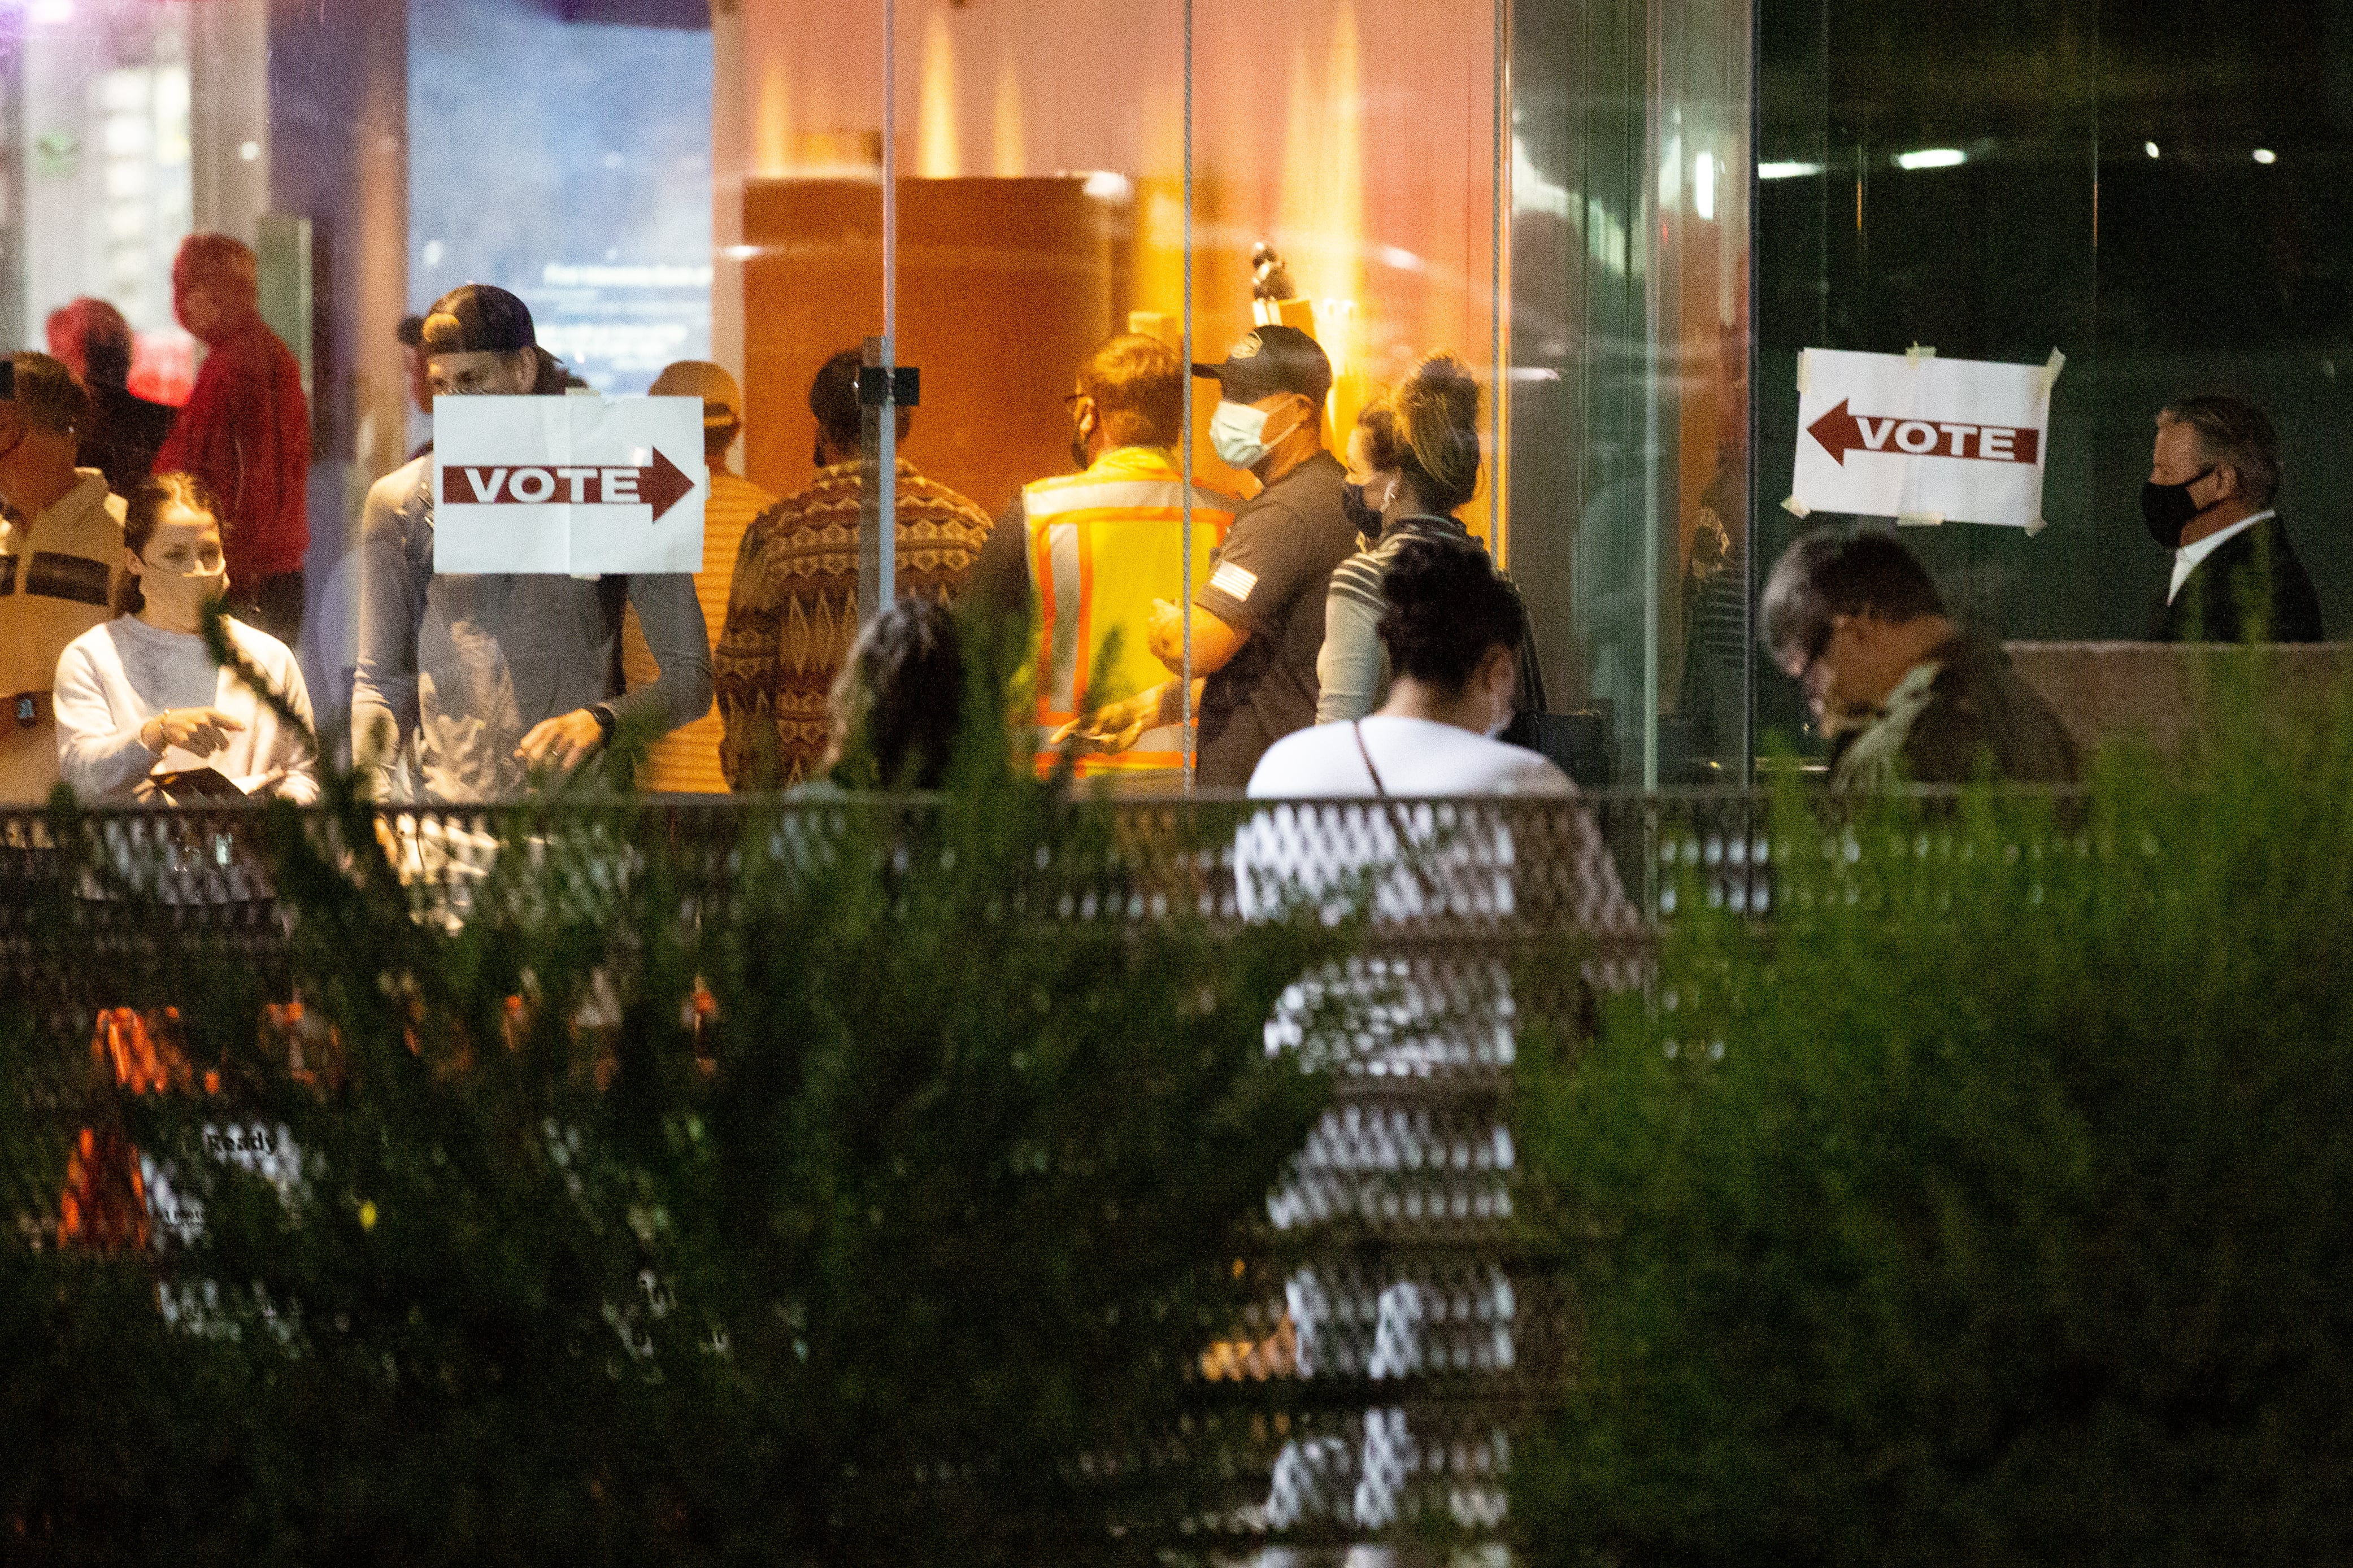 Voters line up outside of the glass doors of a polling site, with white signs and red writing directing them to the entrance.